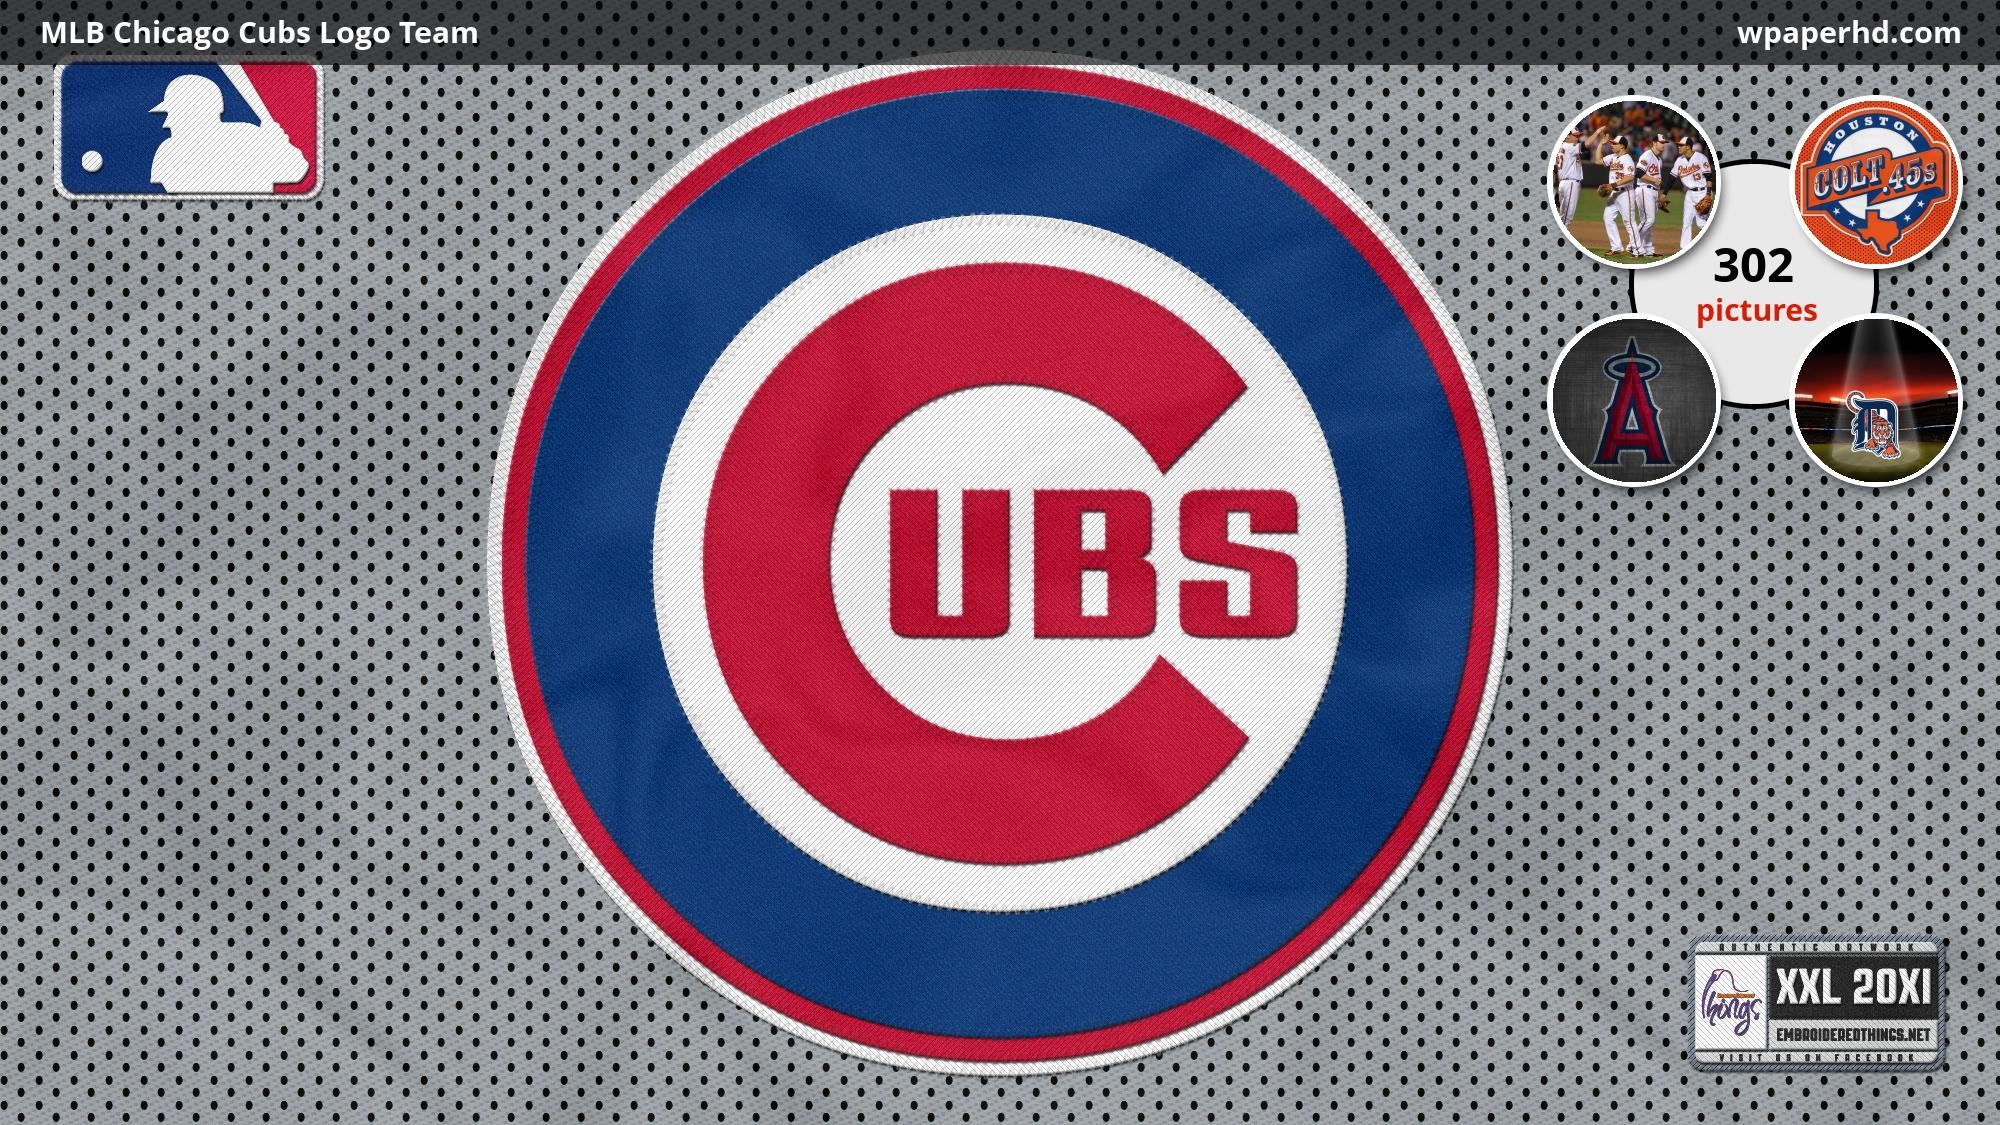 2000x1125 ... Chicago Cubs Logo Team wallpaper, where you can download this picture  in Original size and ...